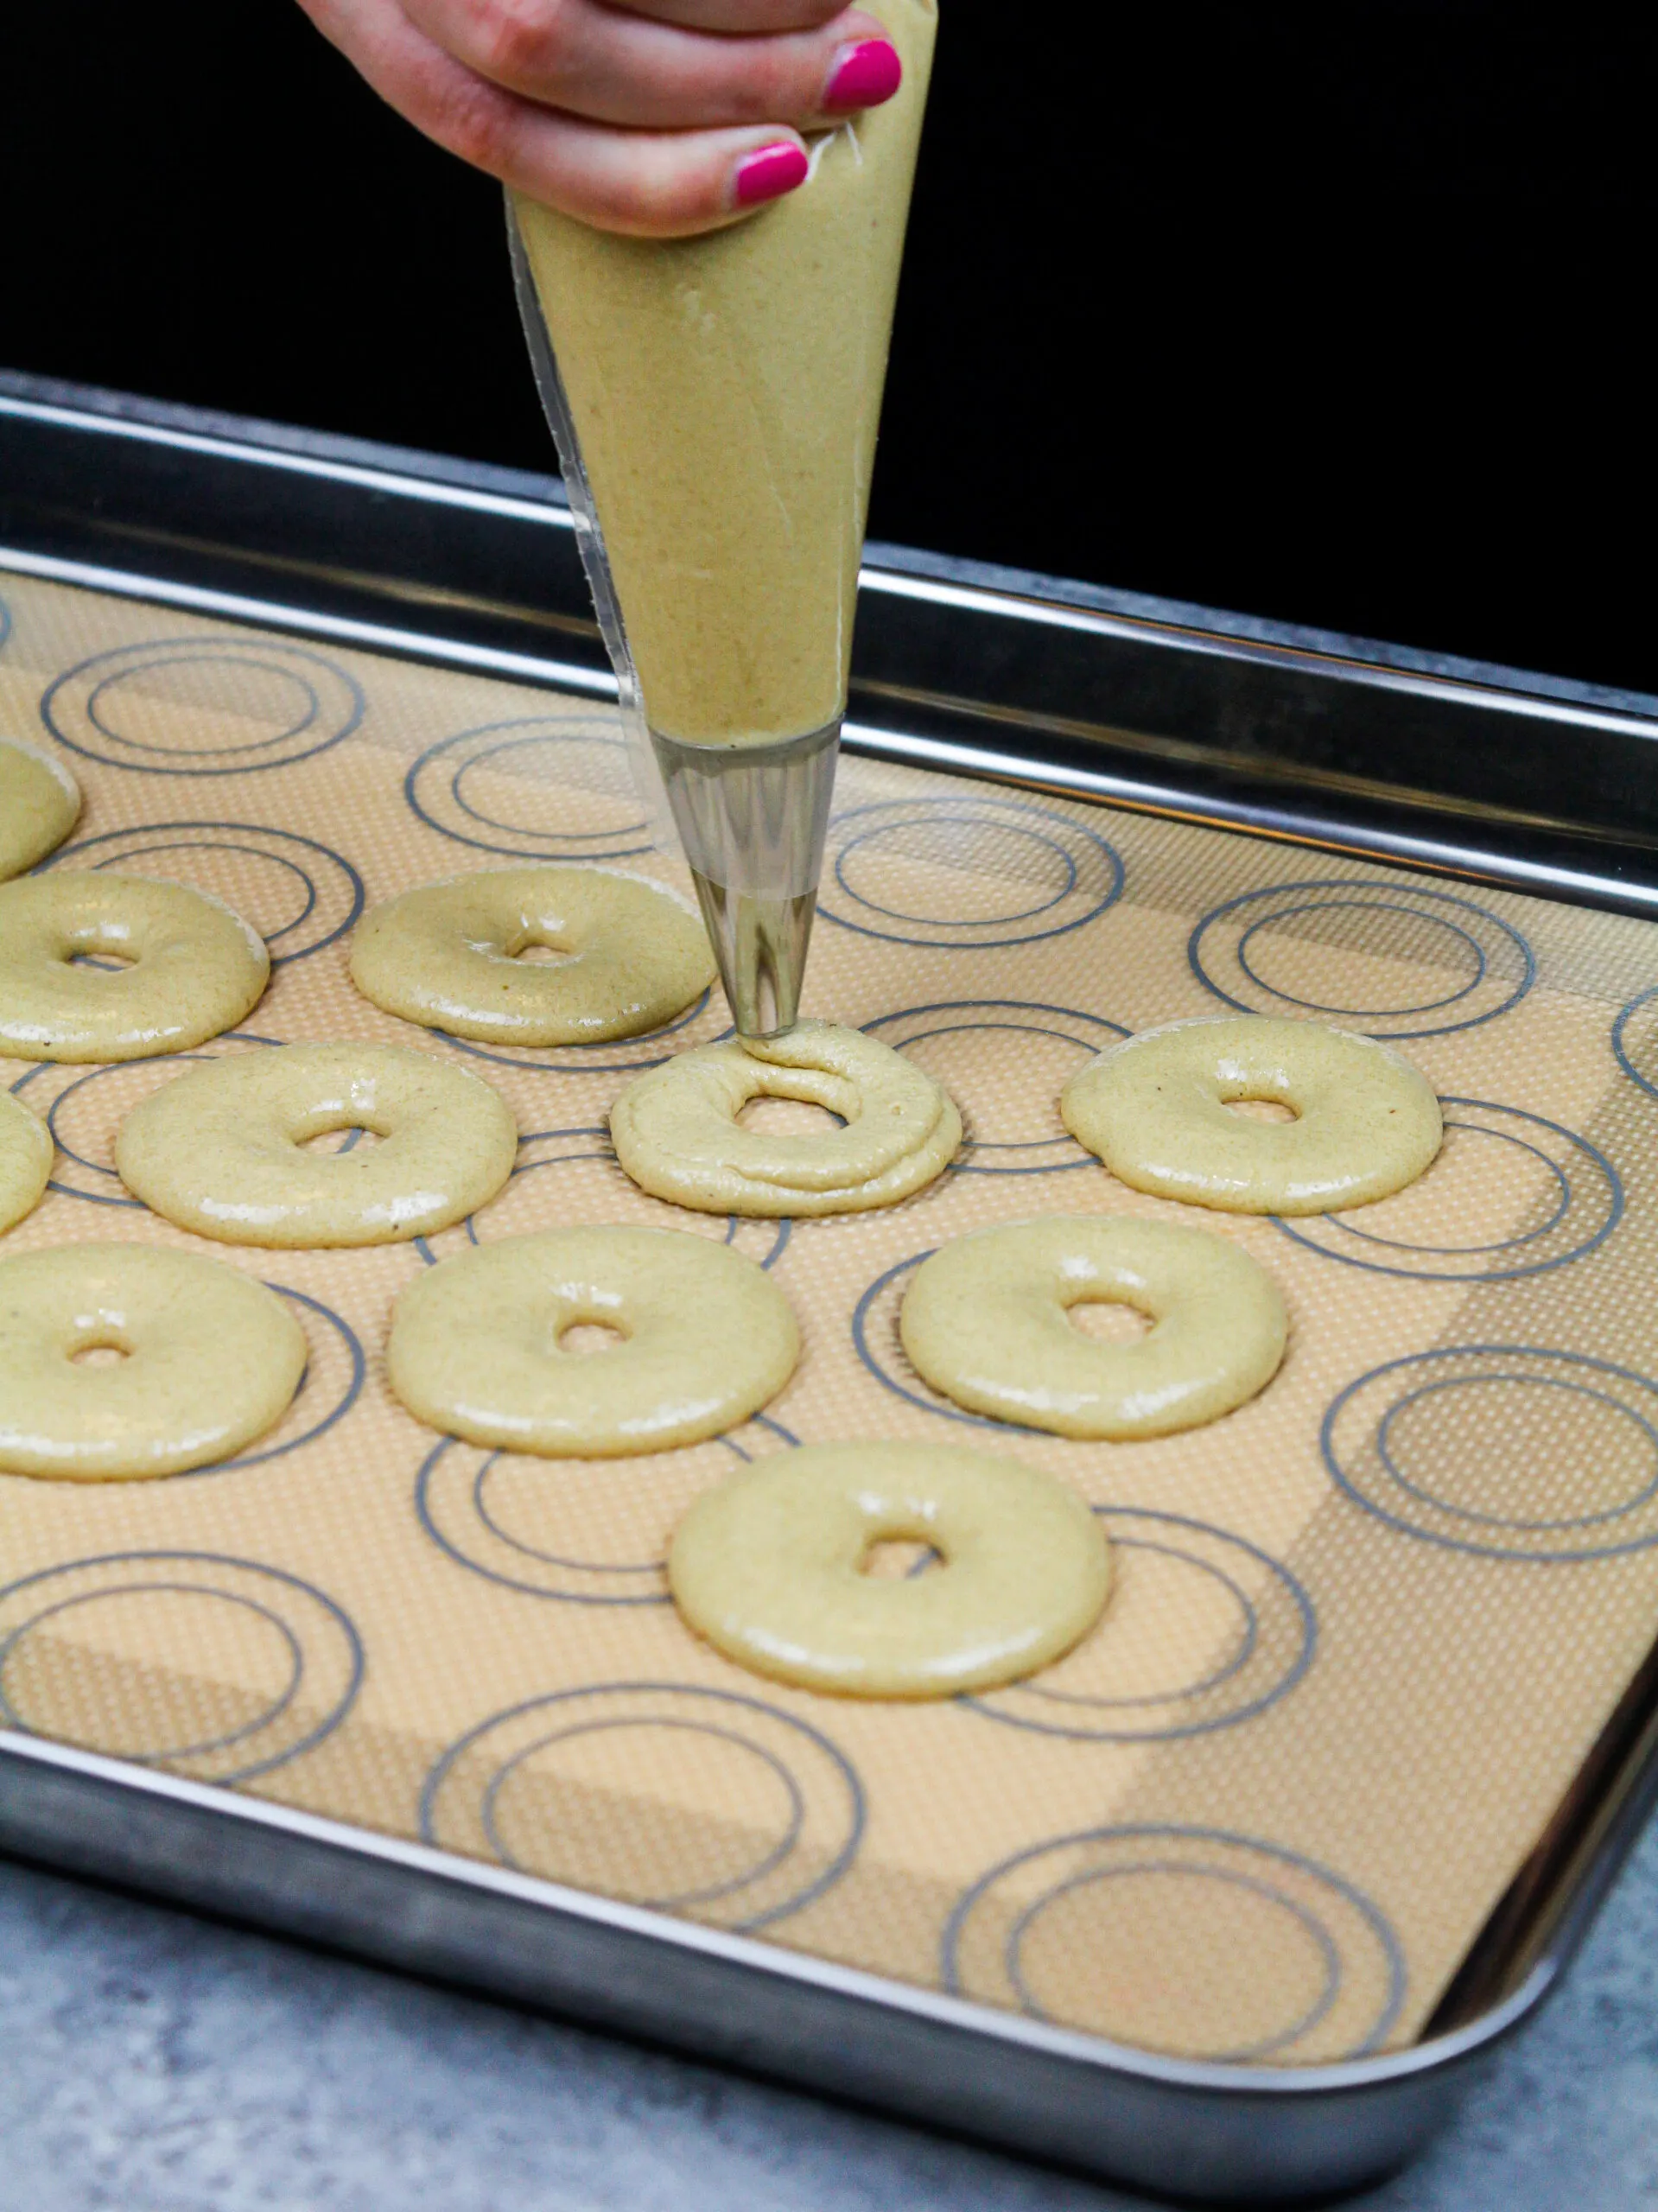 image of macaron batter being piped into rings to make donut shaped macarons